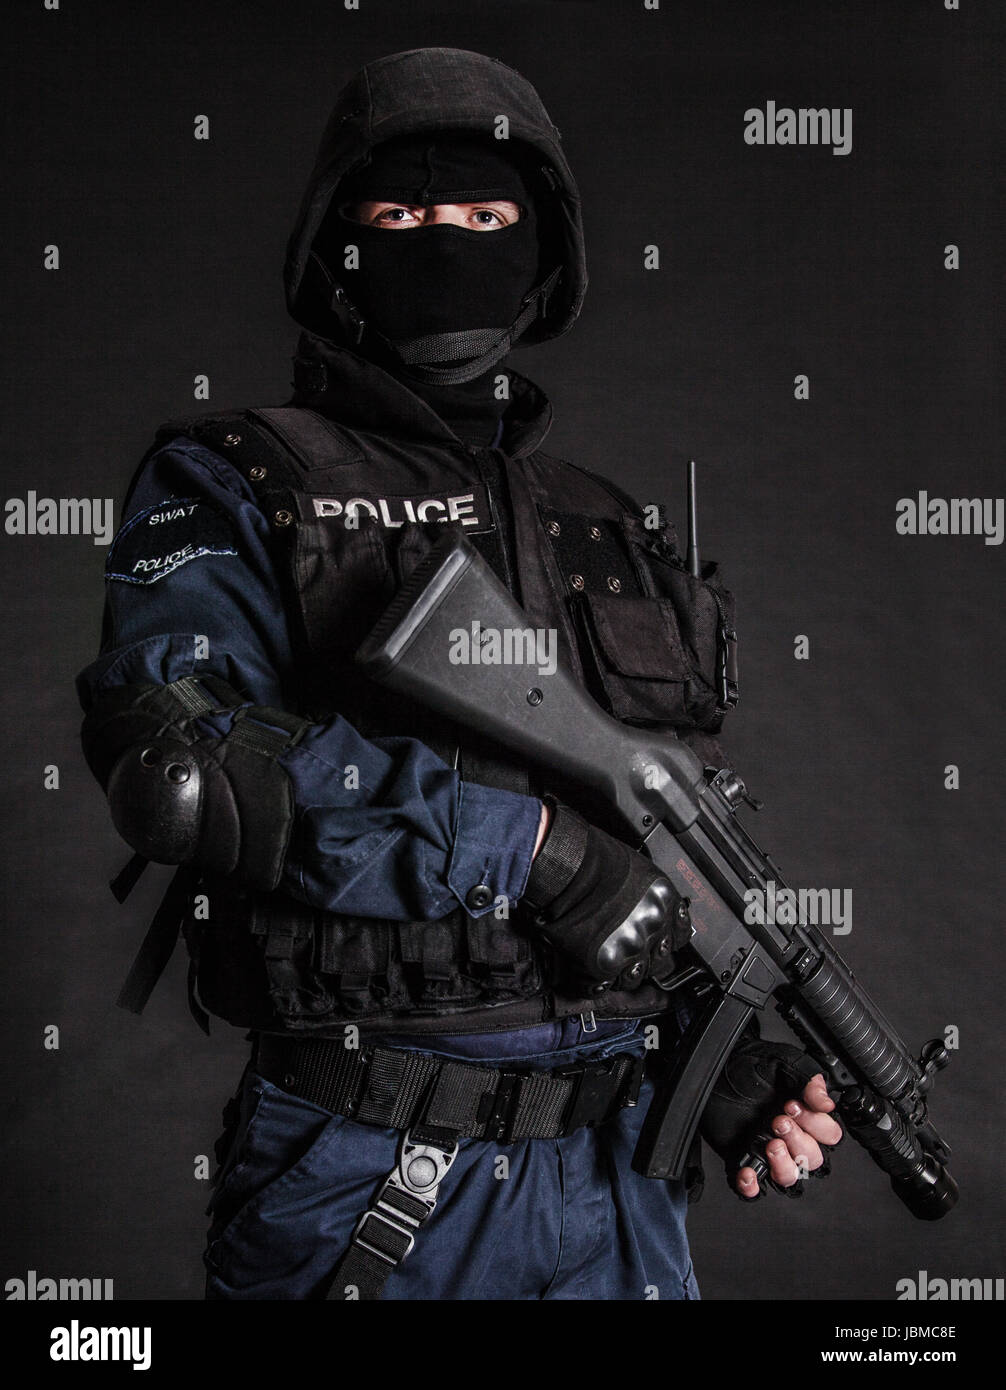 Special Weapons Tactics Swat Team Officer Stock Photo 178633445